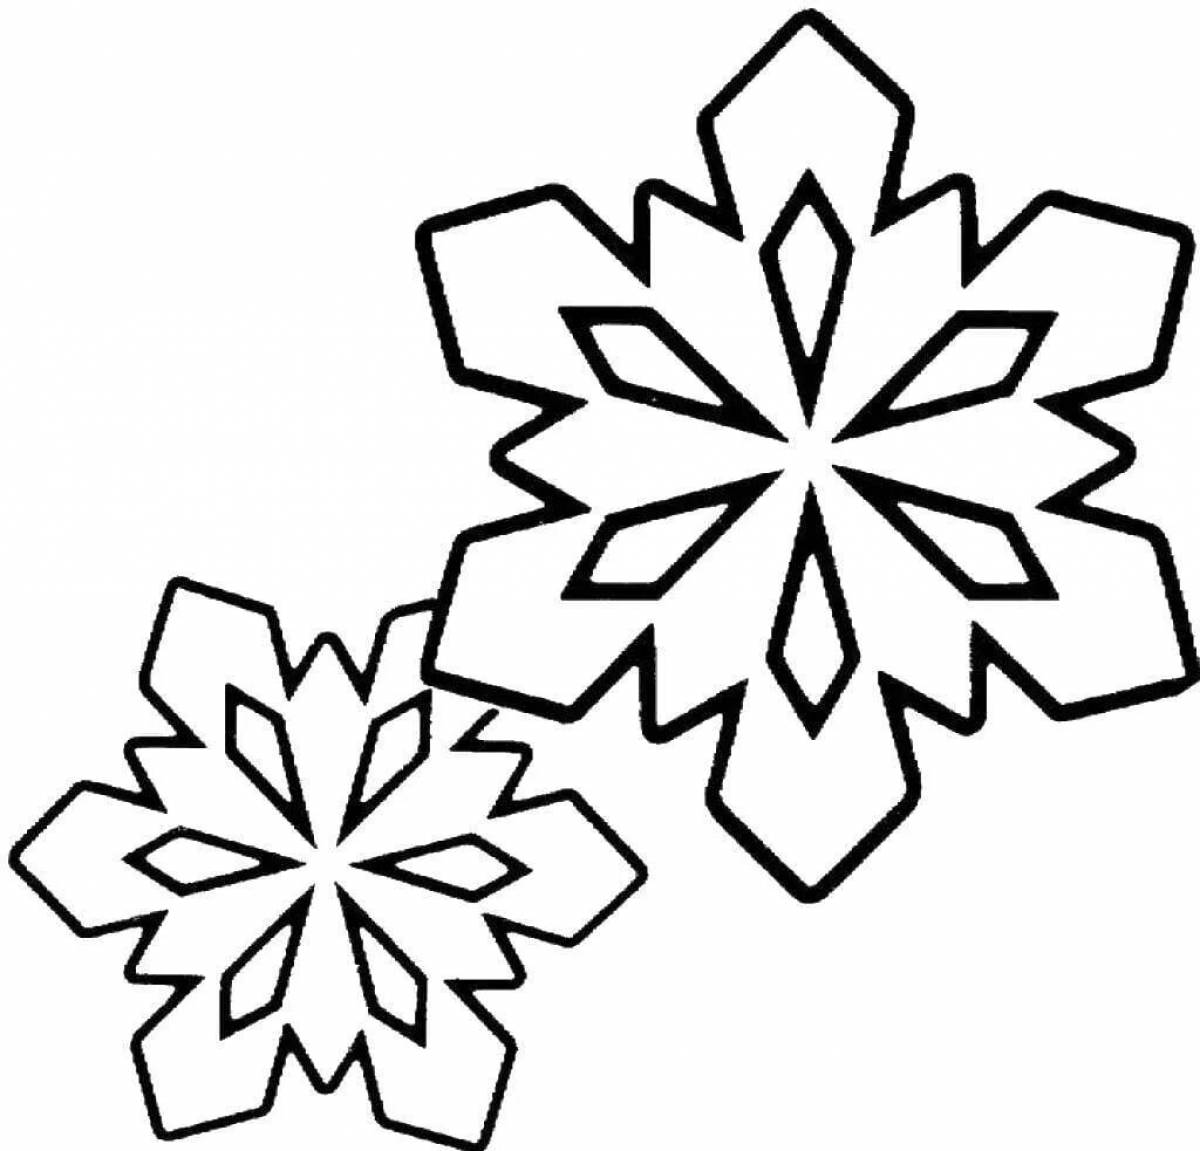 Funny snowflake coloring for kids